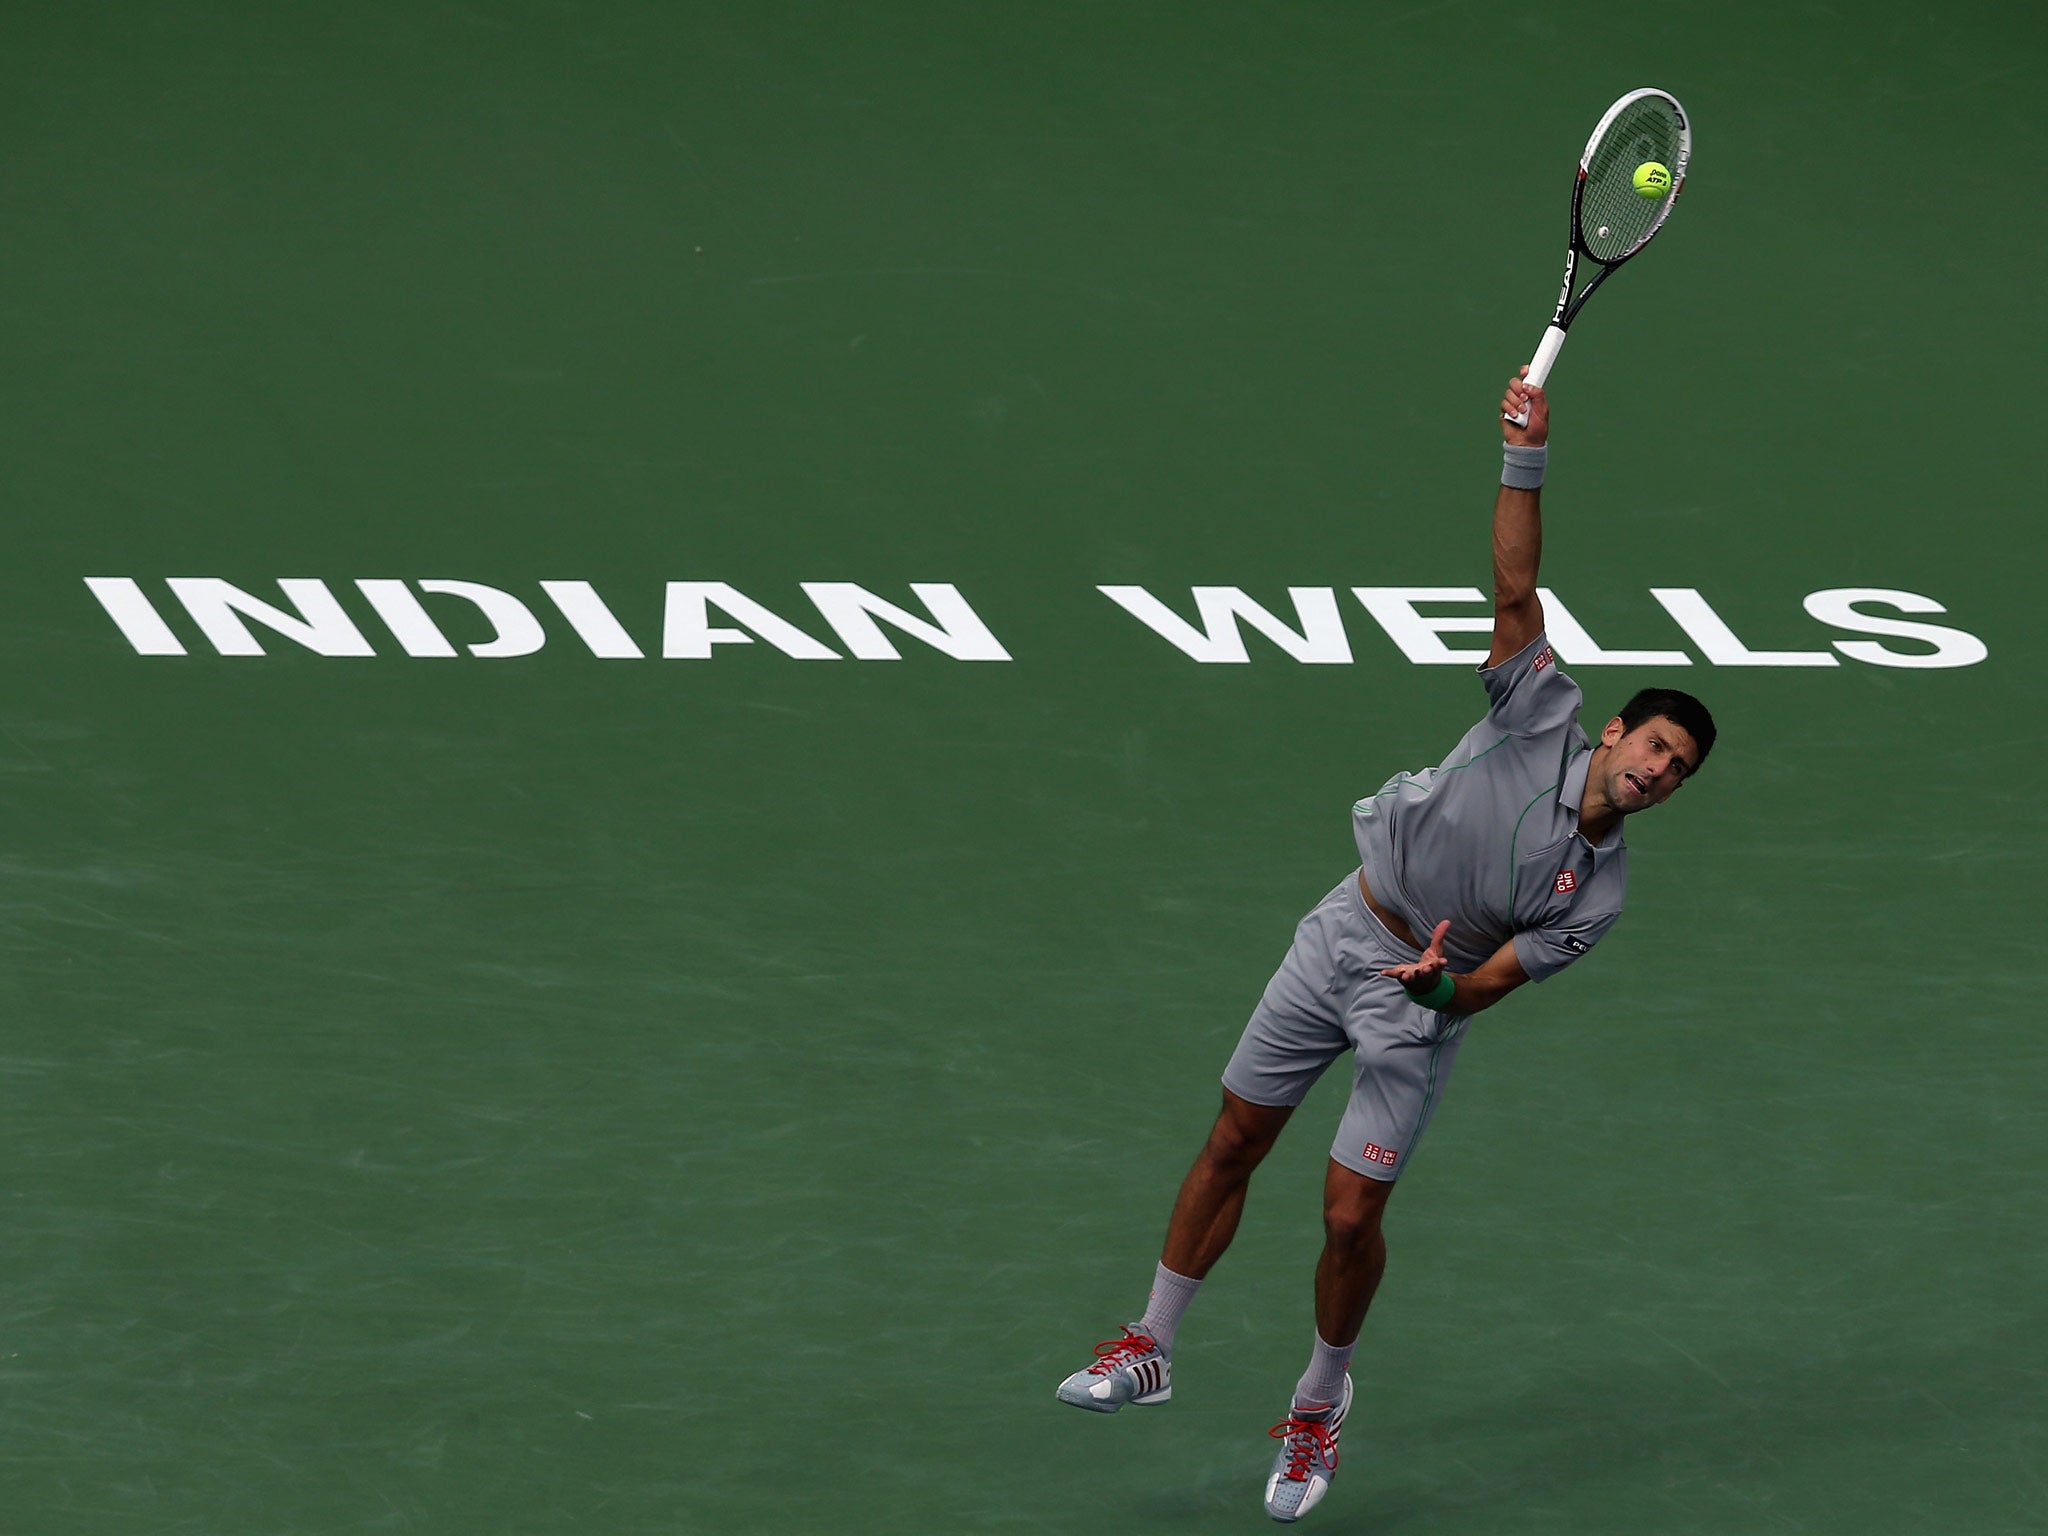 Novak Djokovic of Serbia serves to Alejandro Gonzalez of Colombia during the BNP Paribas Open at Indian Wells